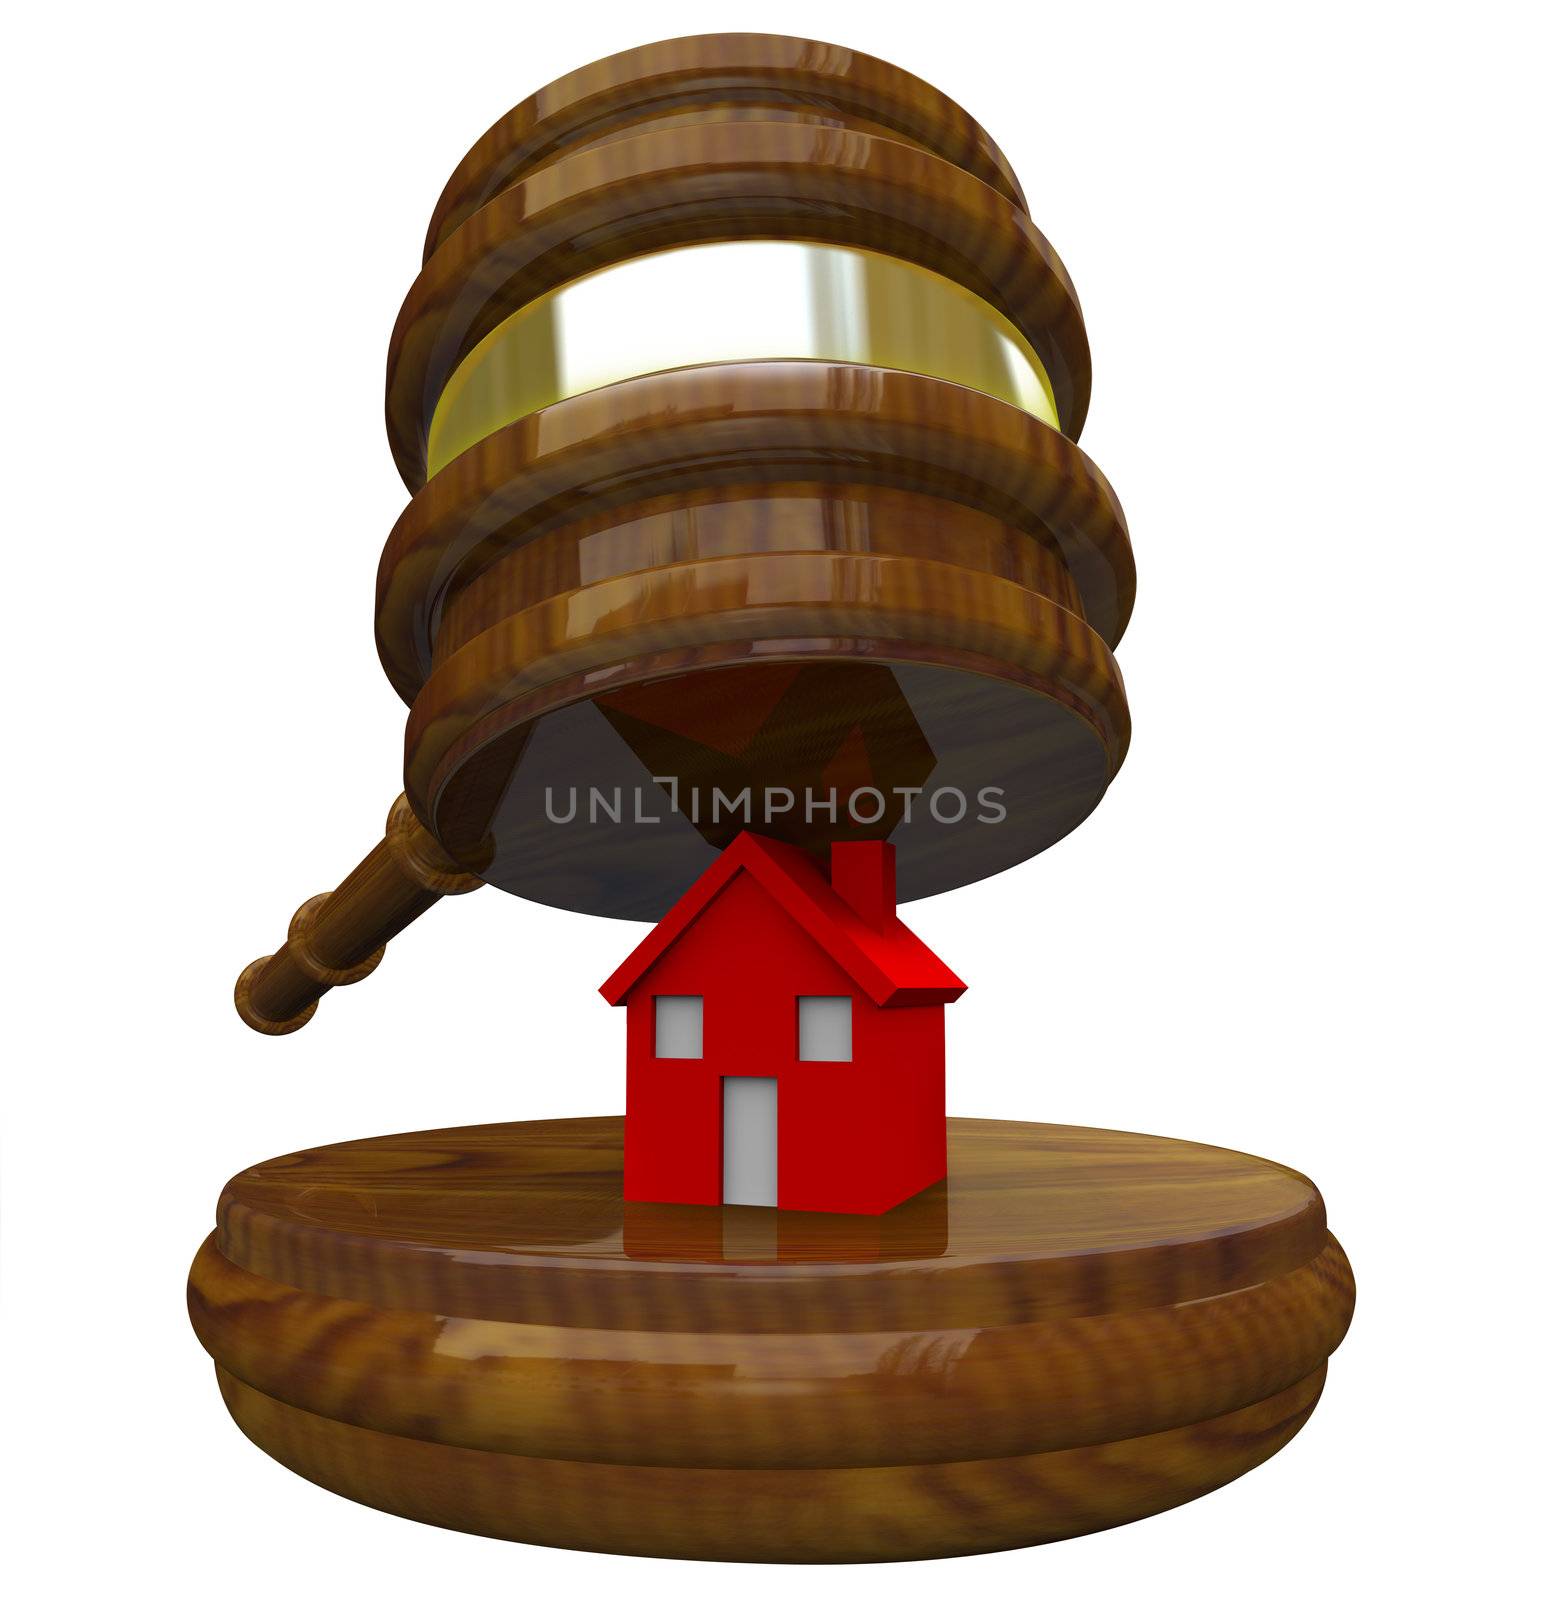 A red illustrated 3D house on a wood block about to be smashed by a gavel, symbolizing the auctioning or foreclosure of a house and losing a home due to bankruptcy